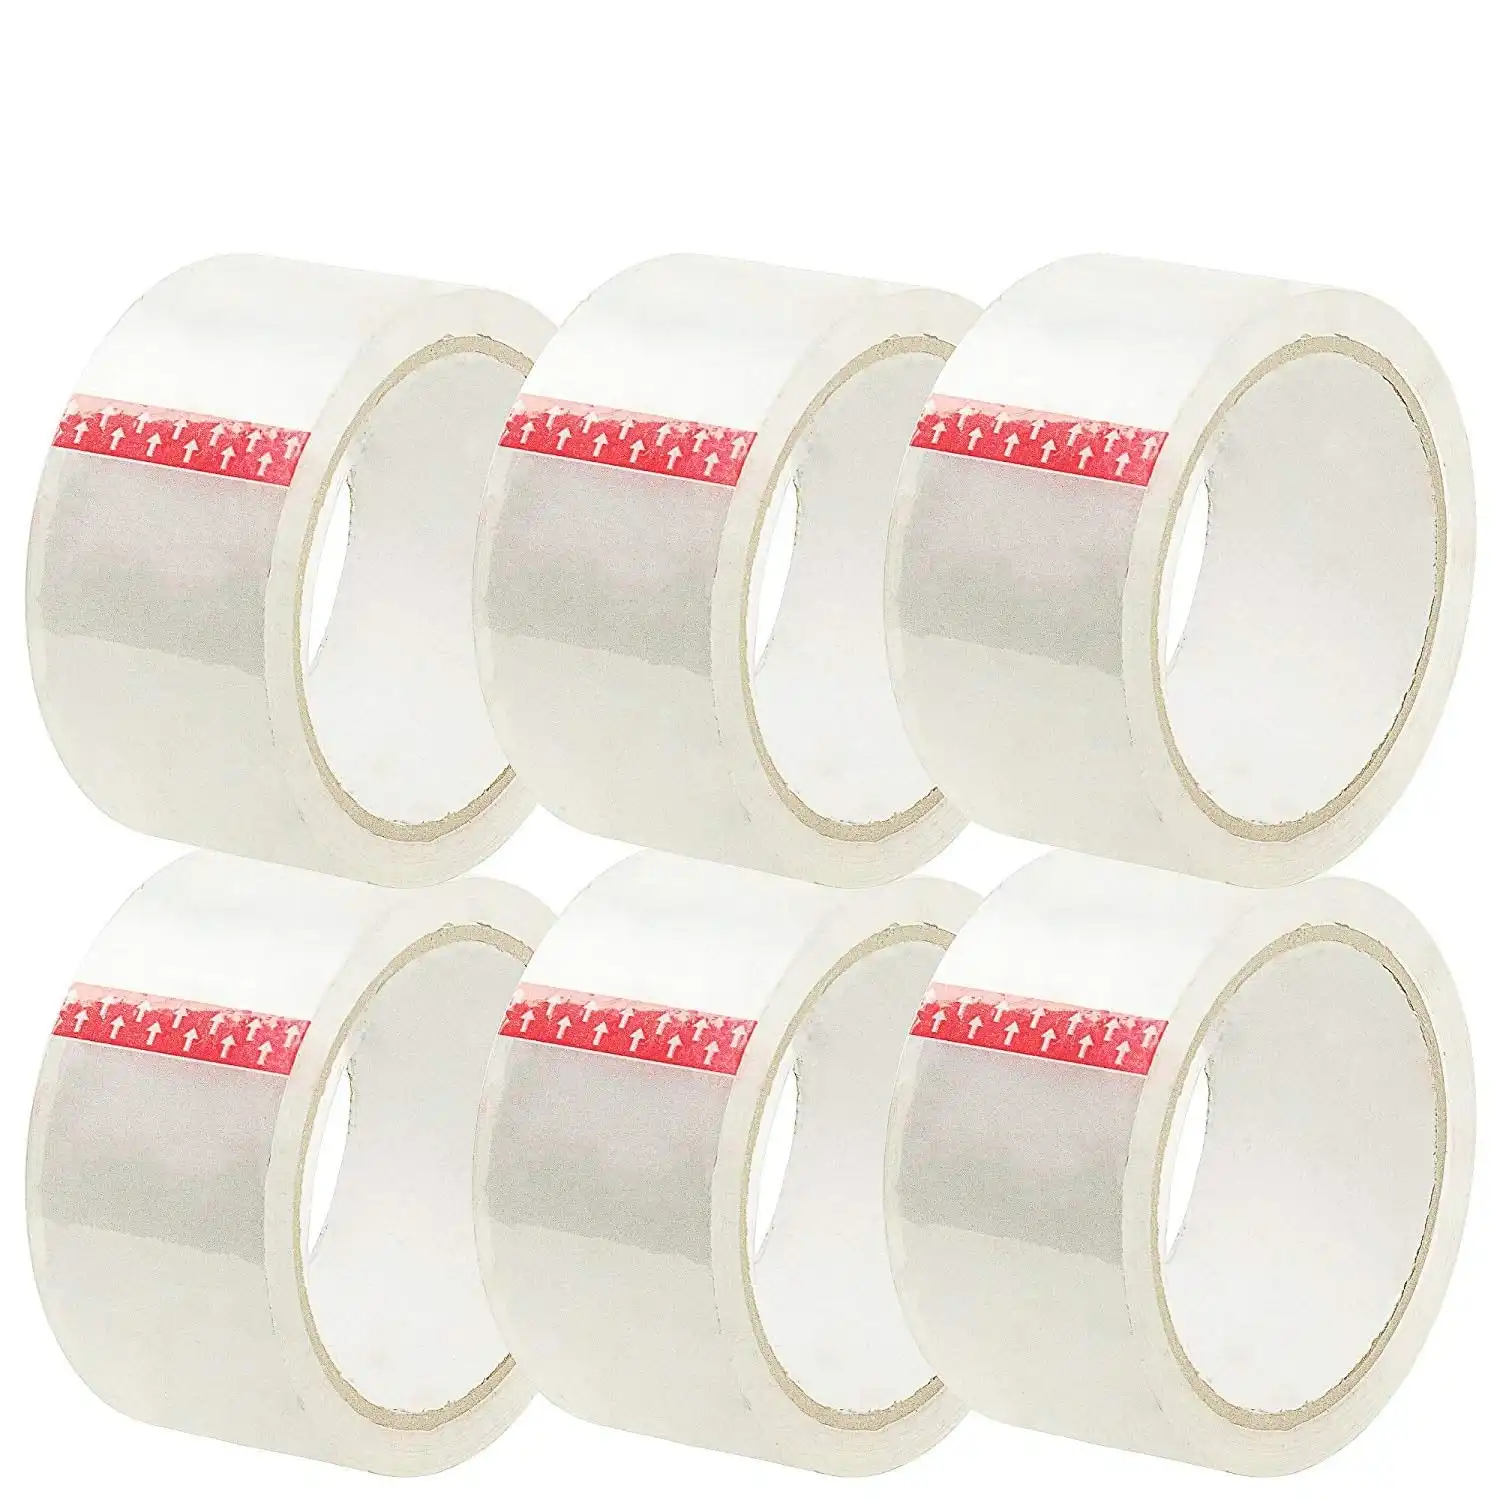 [36 Pack] Clear Packaging Sticky Tape Heavy Duty 48mm x 50m | 36 Value Pack | Packing Tapes